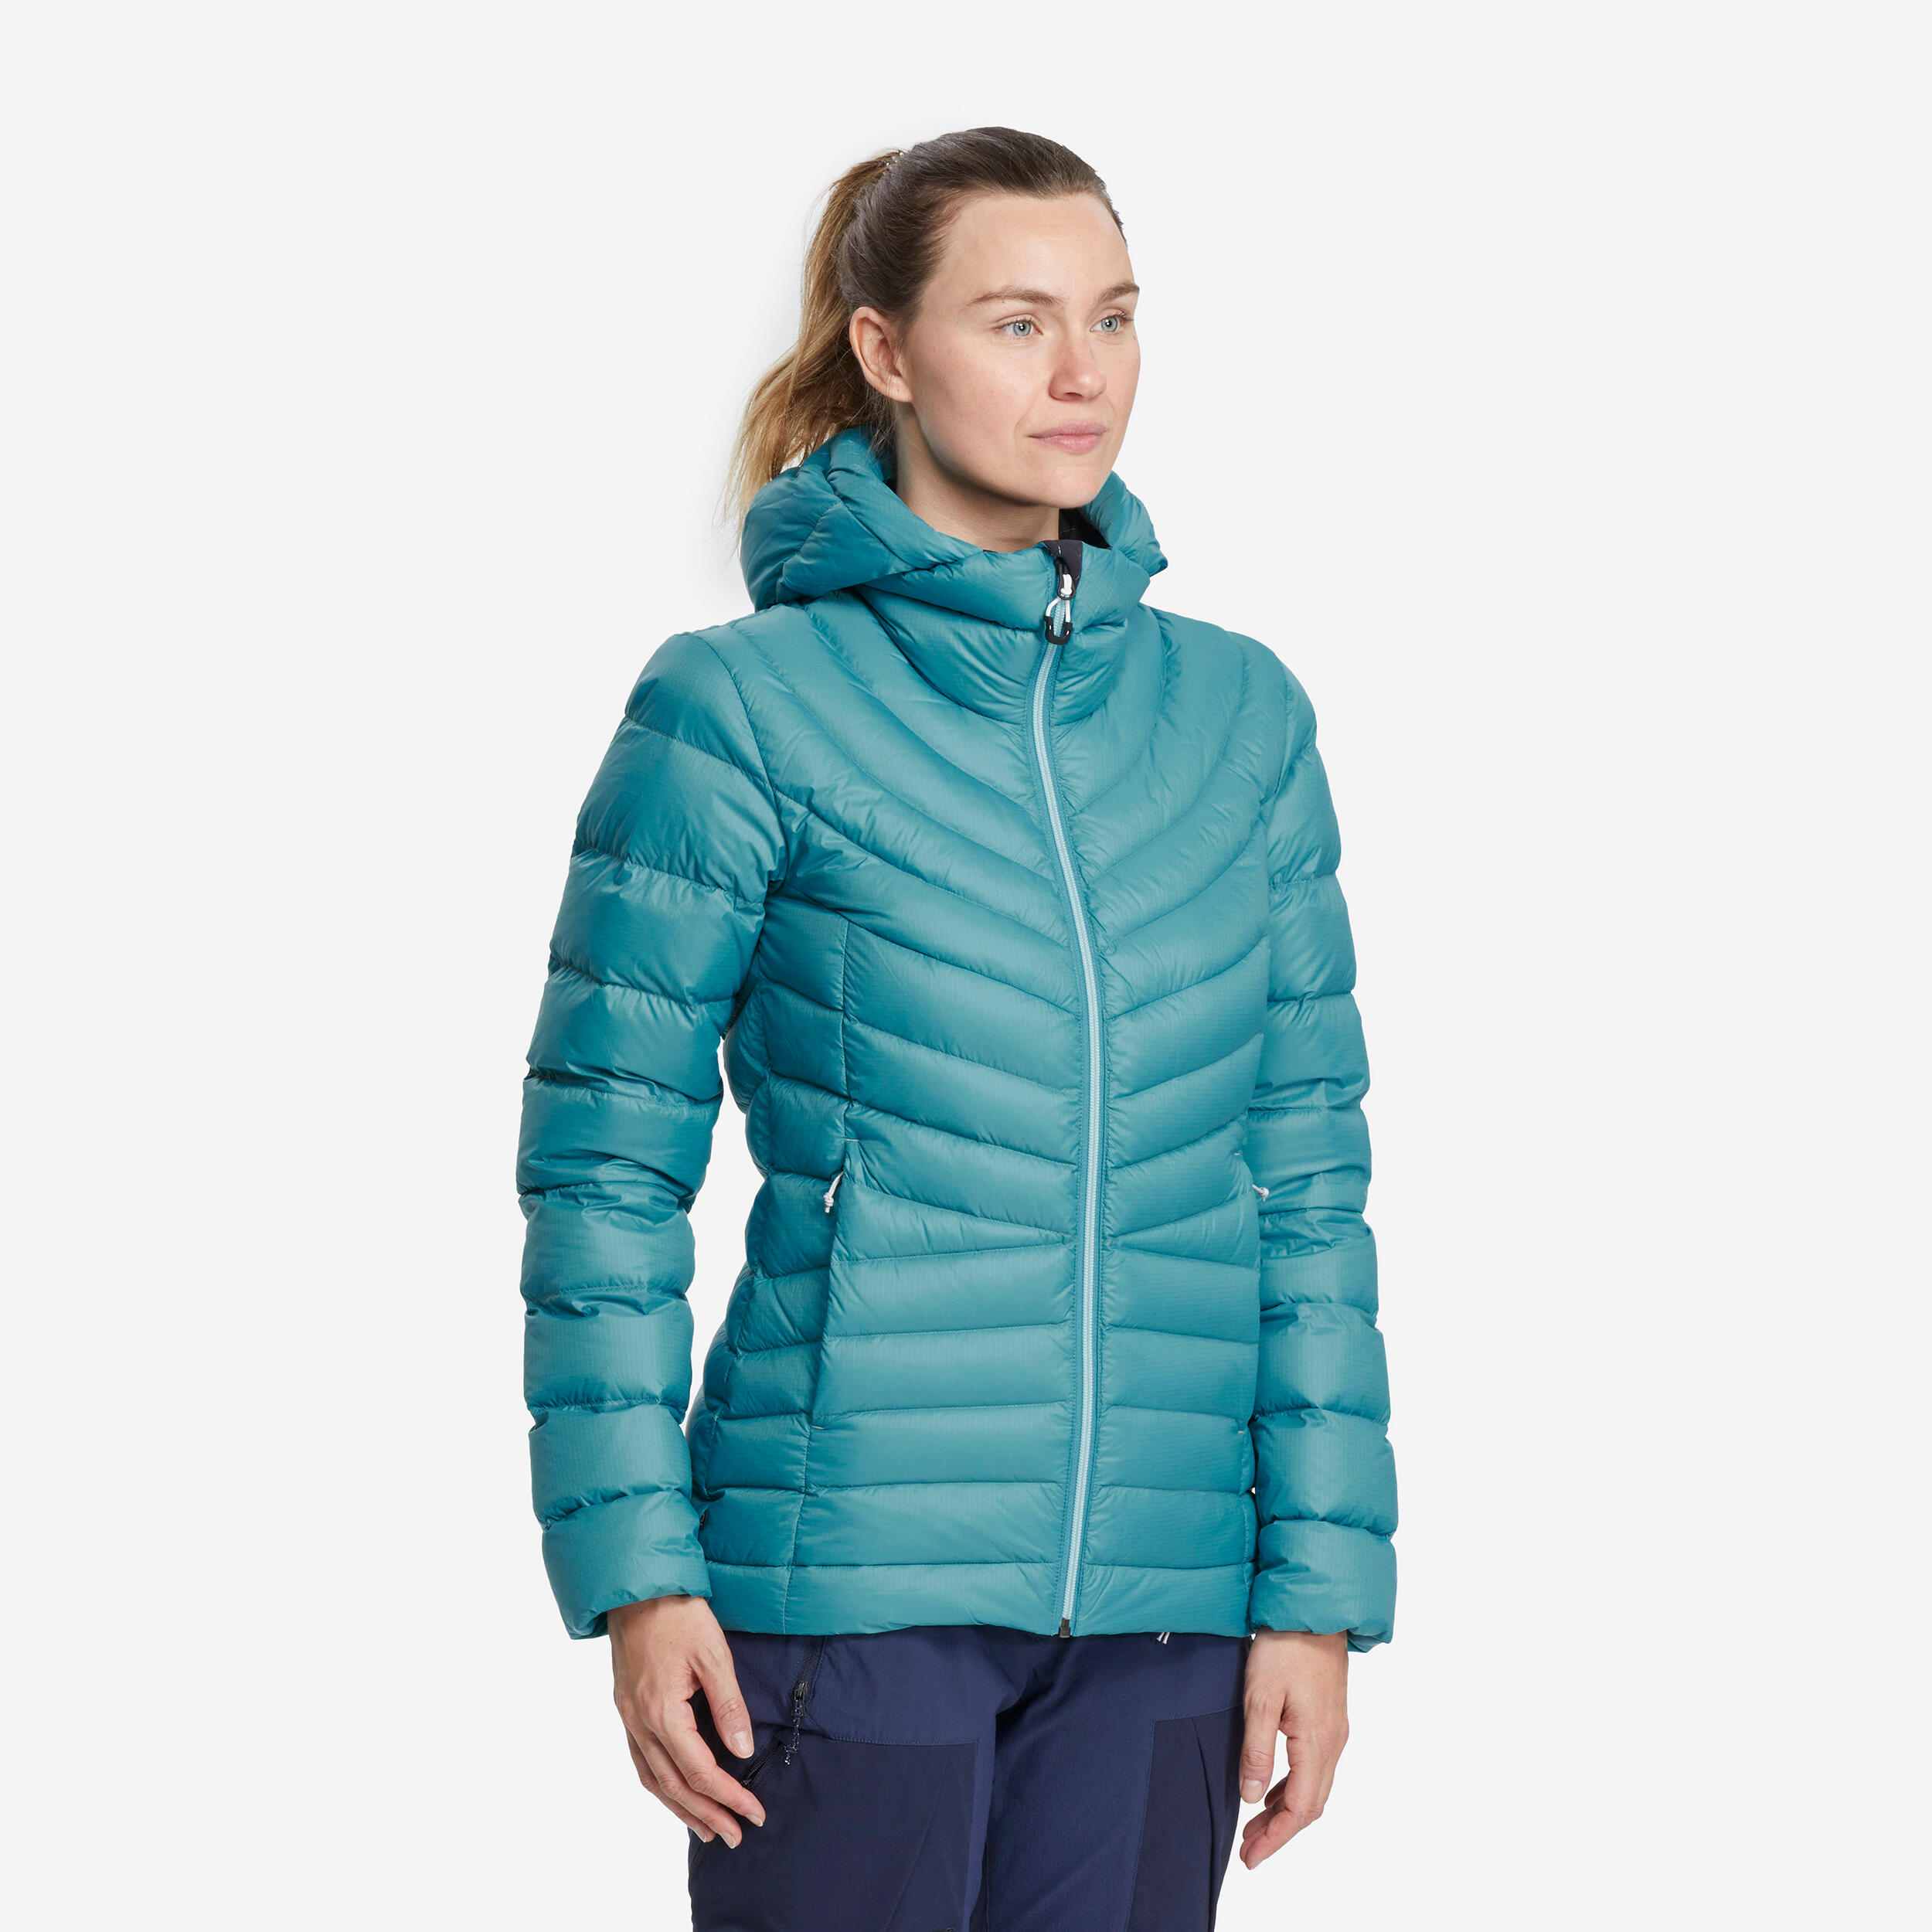 Image of Women’s Down Winter Jacket - MT 500 Turquoise